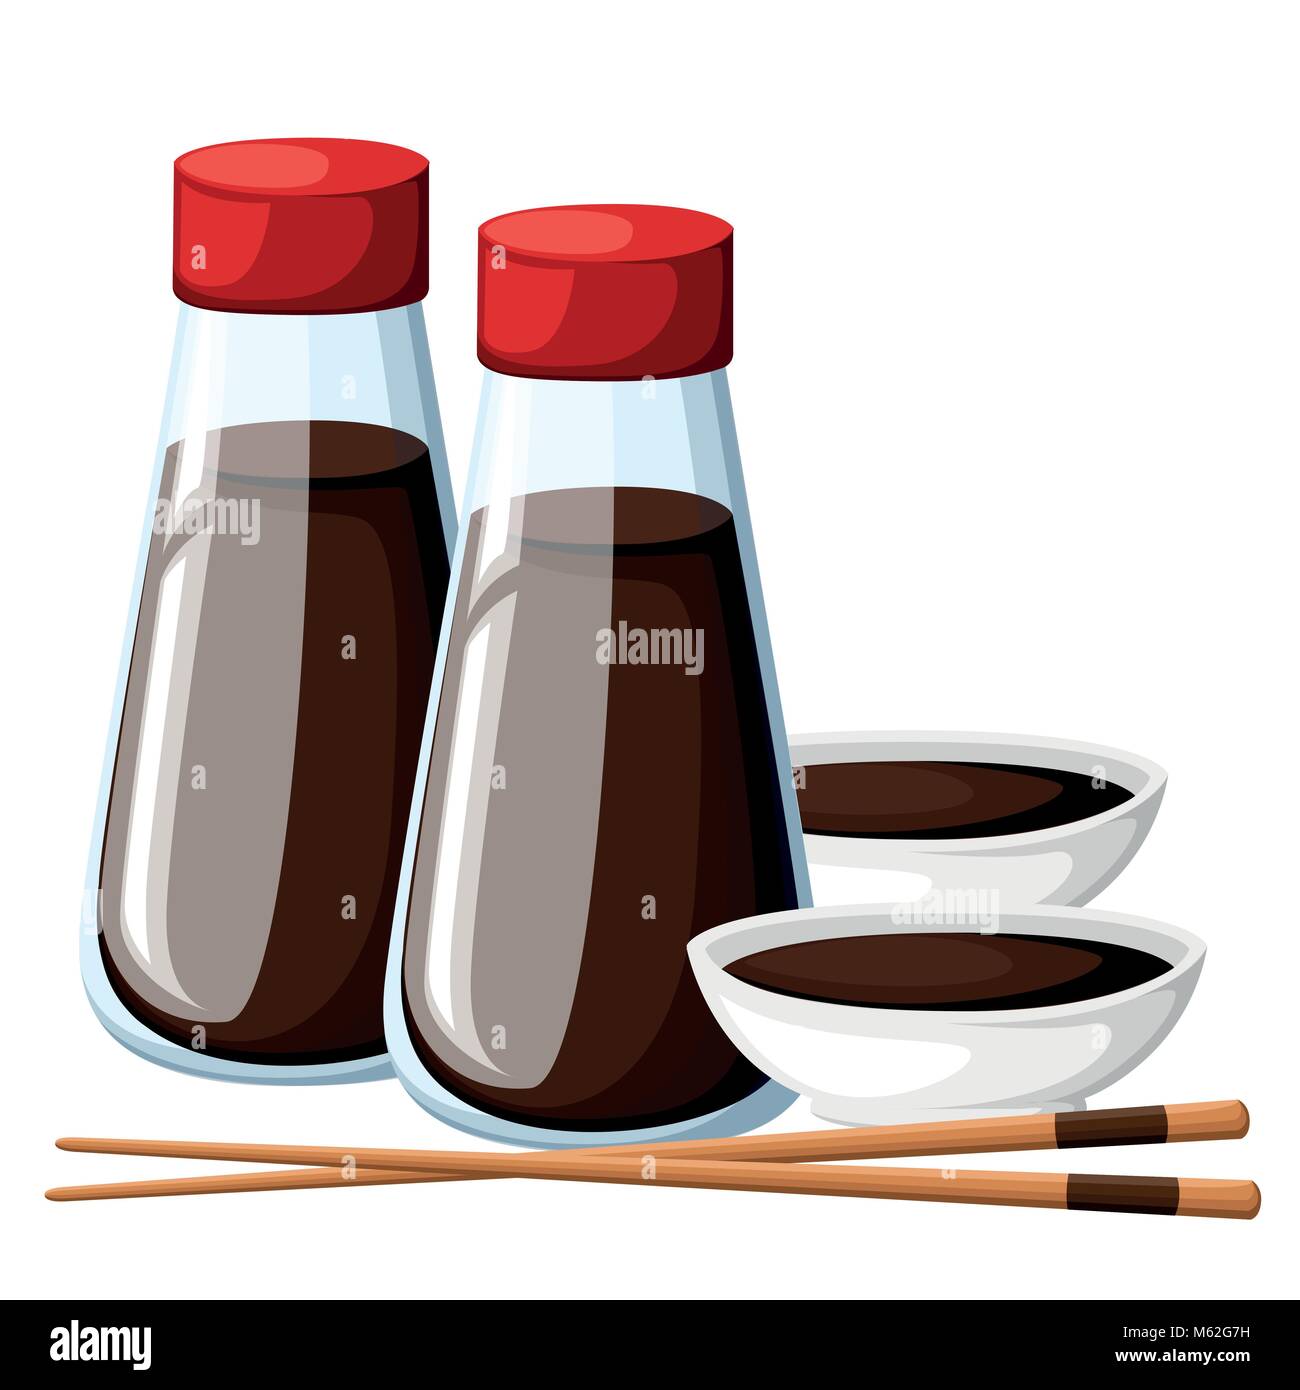 Japanese chopsticks and soy sauce in a white bowl soy sauce in transparent bottles with red caps vector illustration isolated on white background web site page and mobile app design Stock Vector